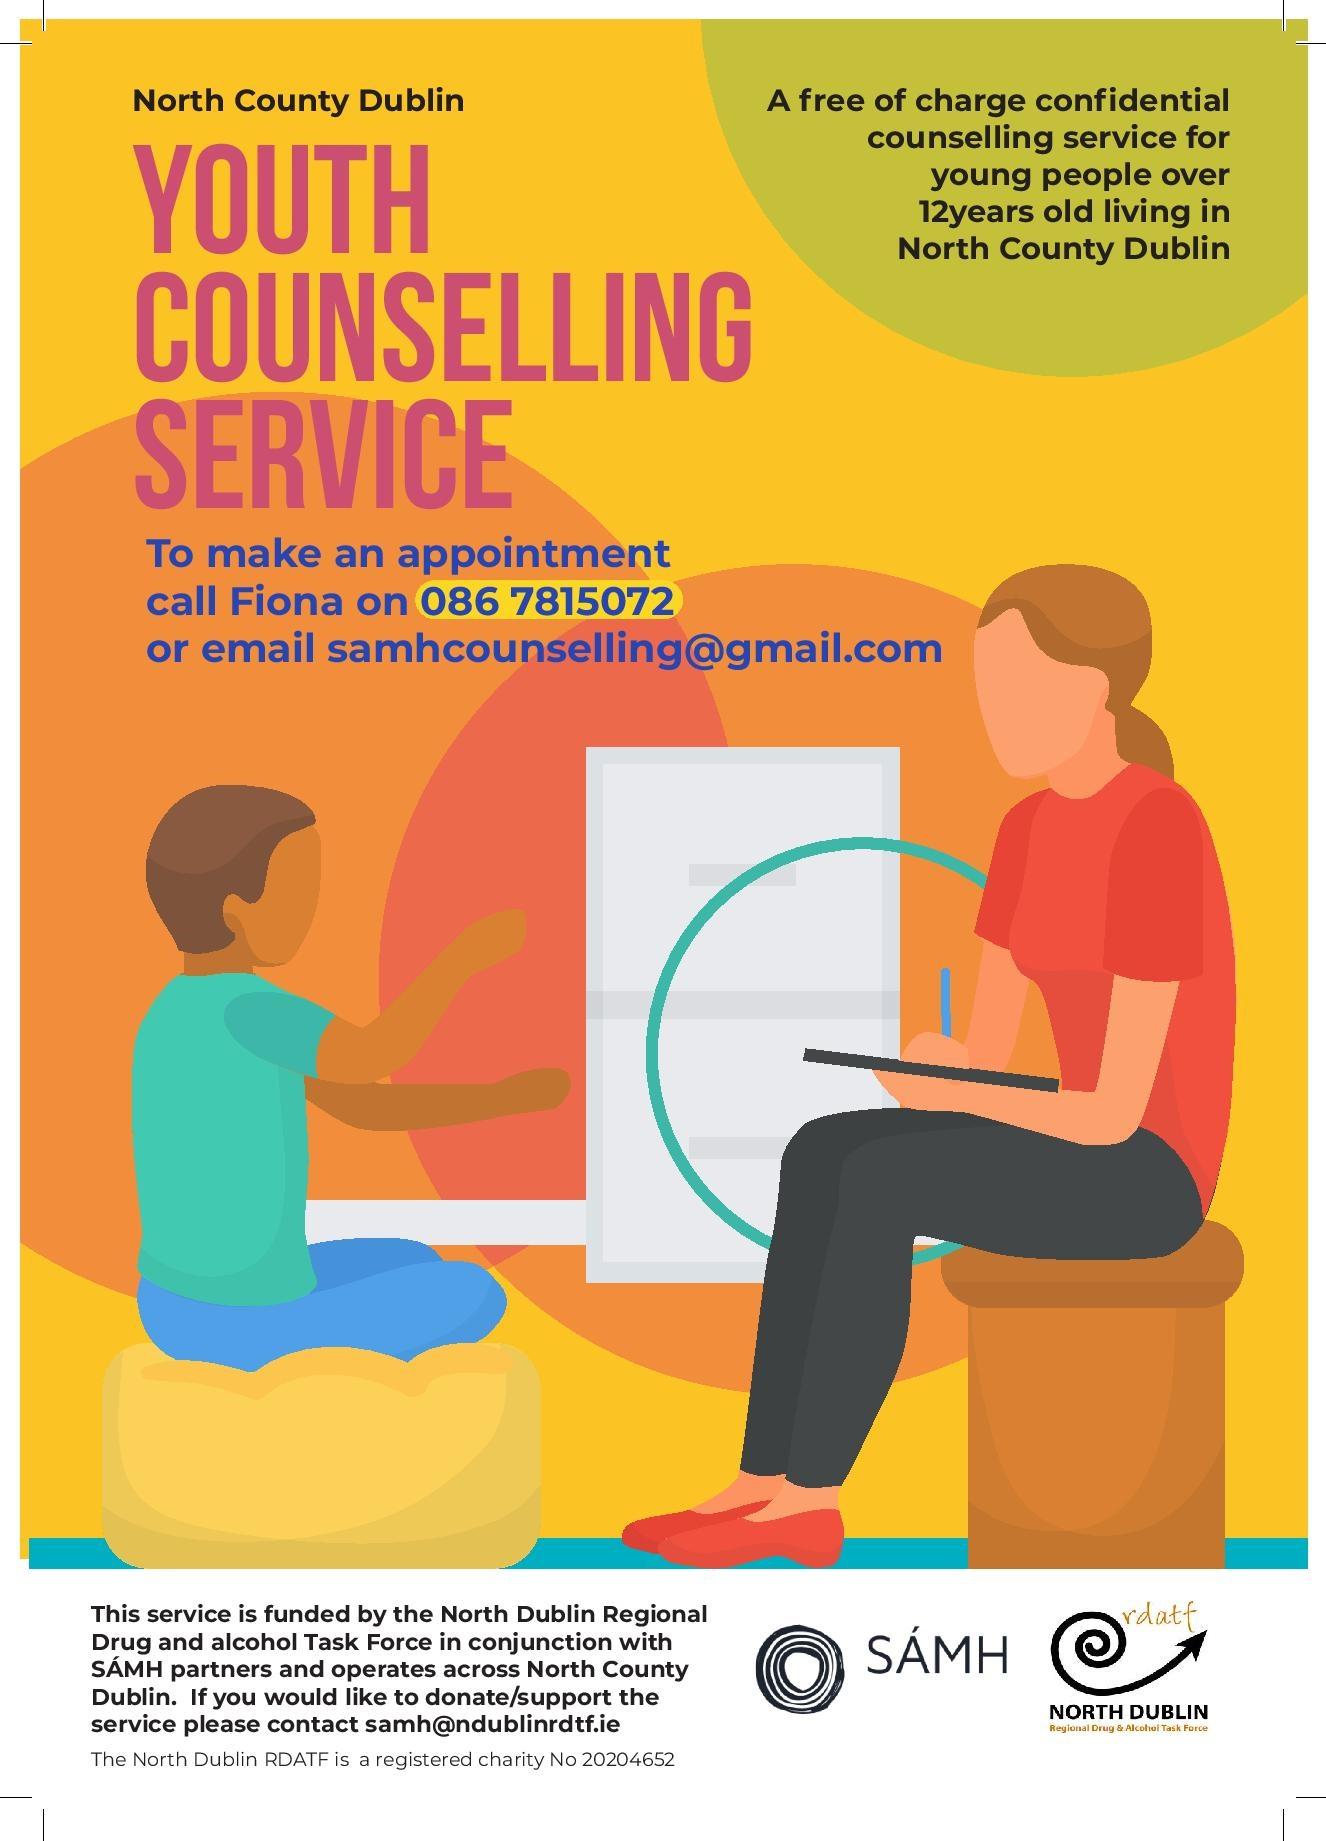 Youth Counseling service flyer